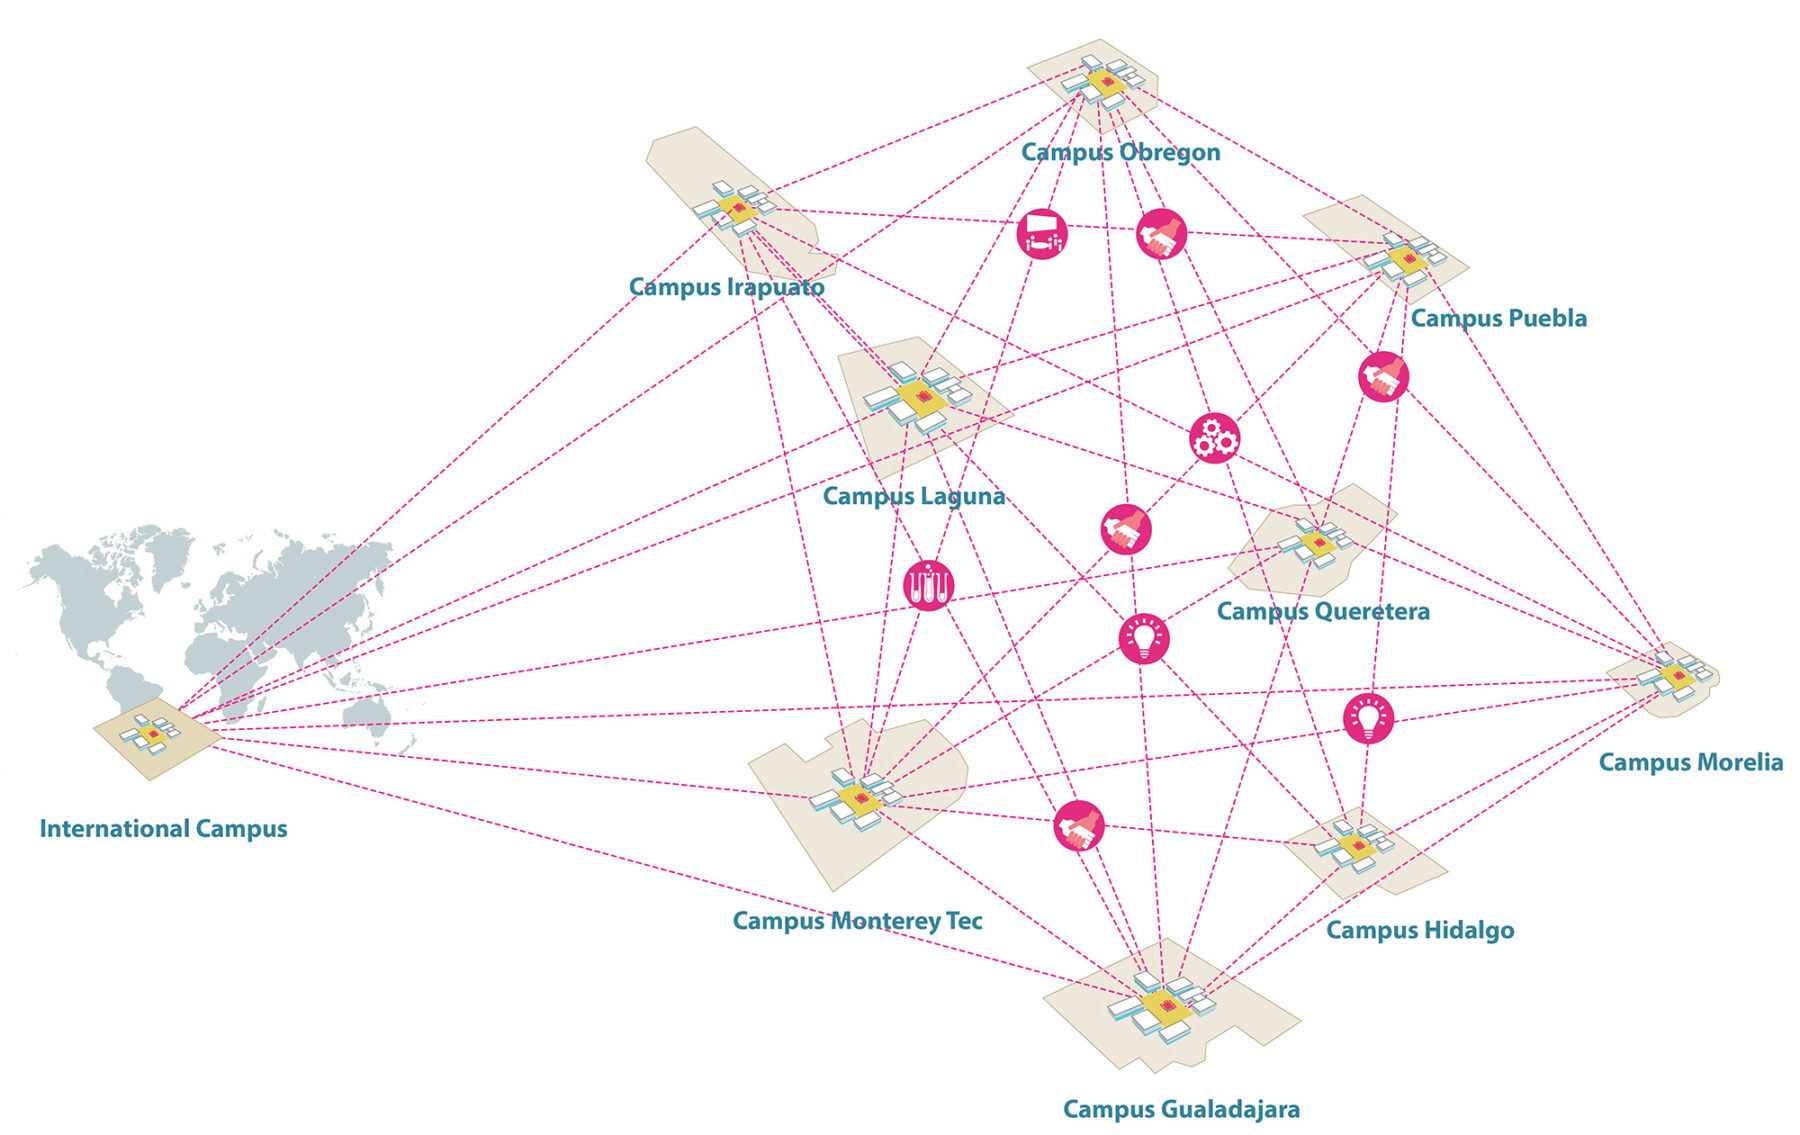 Diagram of integrated digital networks connecting multiple campuses